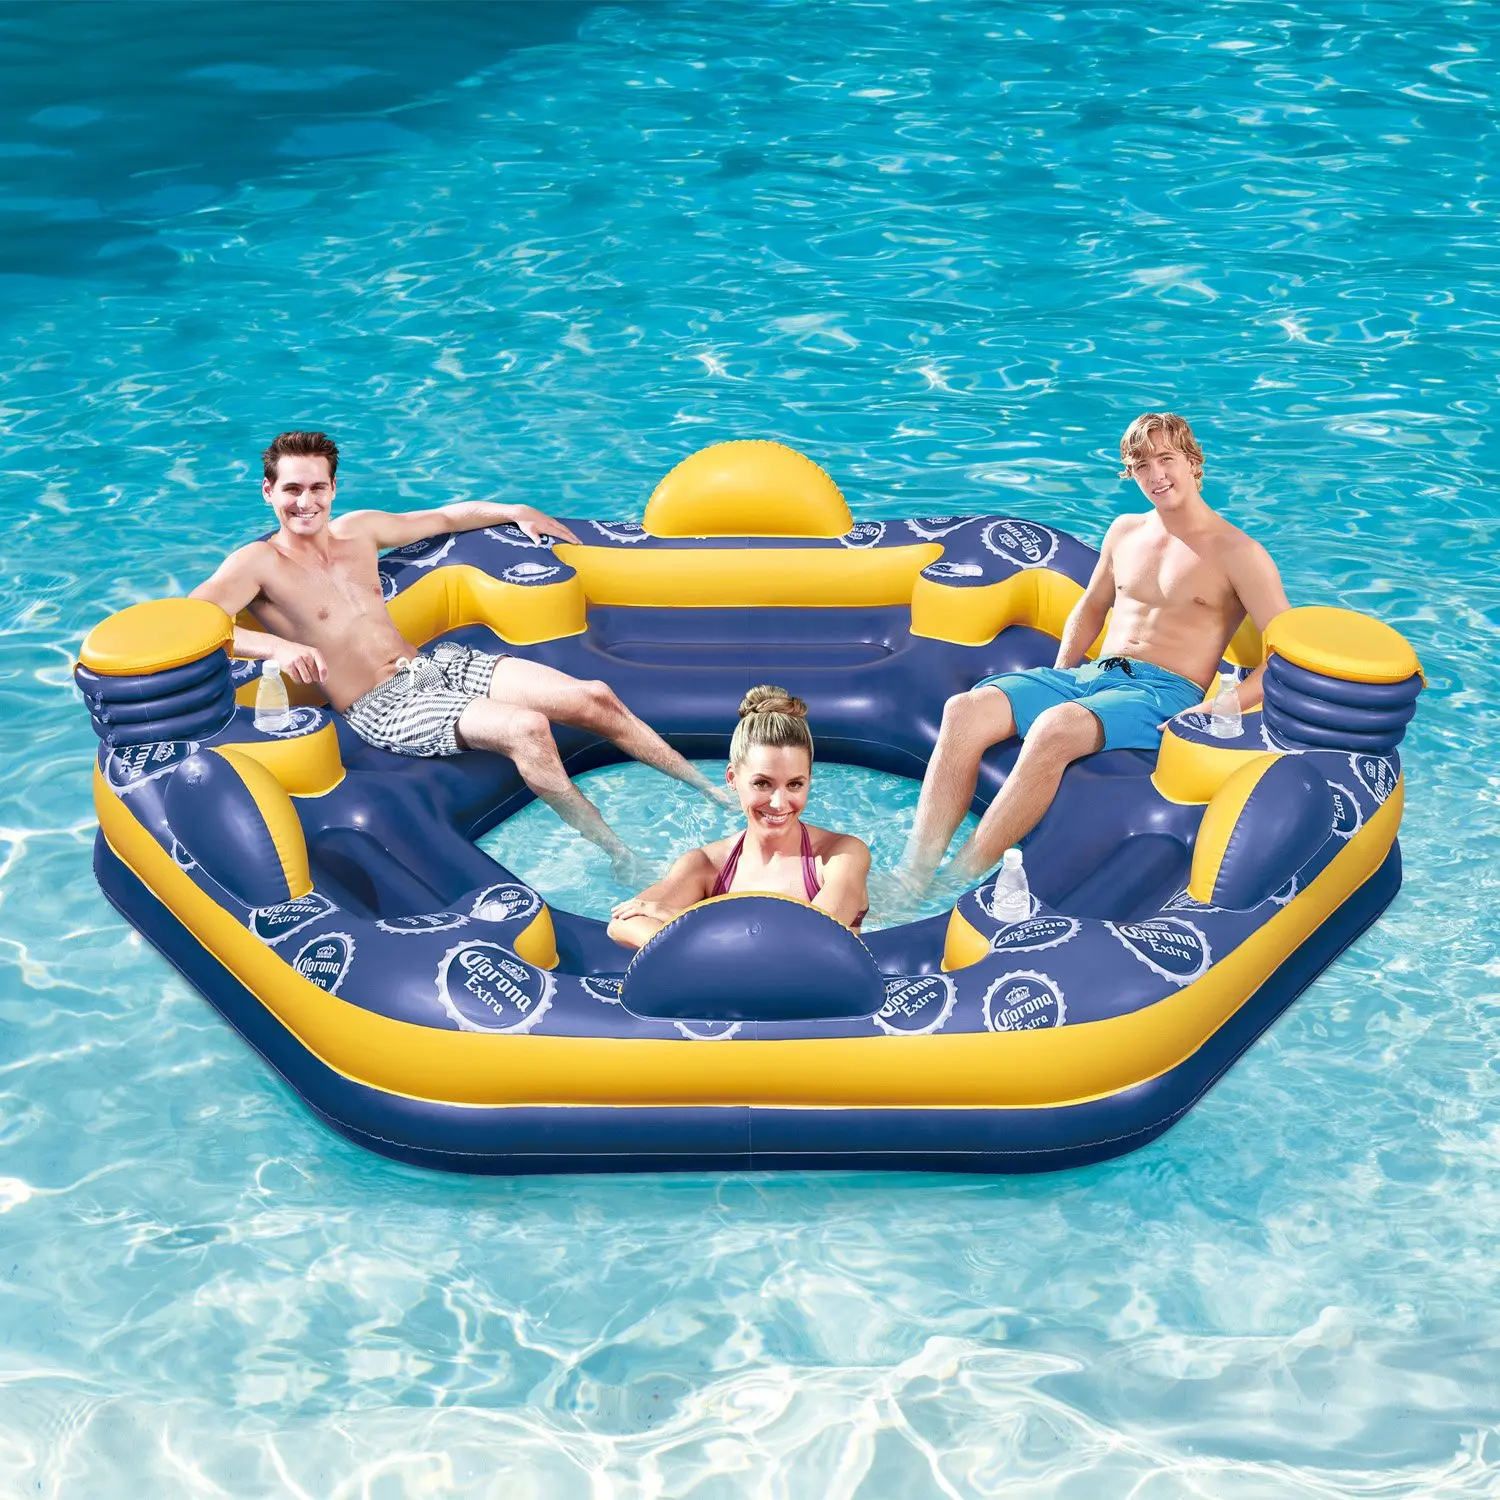 Buy Inflatable 6-Person Pool Raft Floating Island w/ 2 Built-in Coolers ...